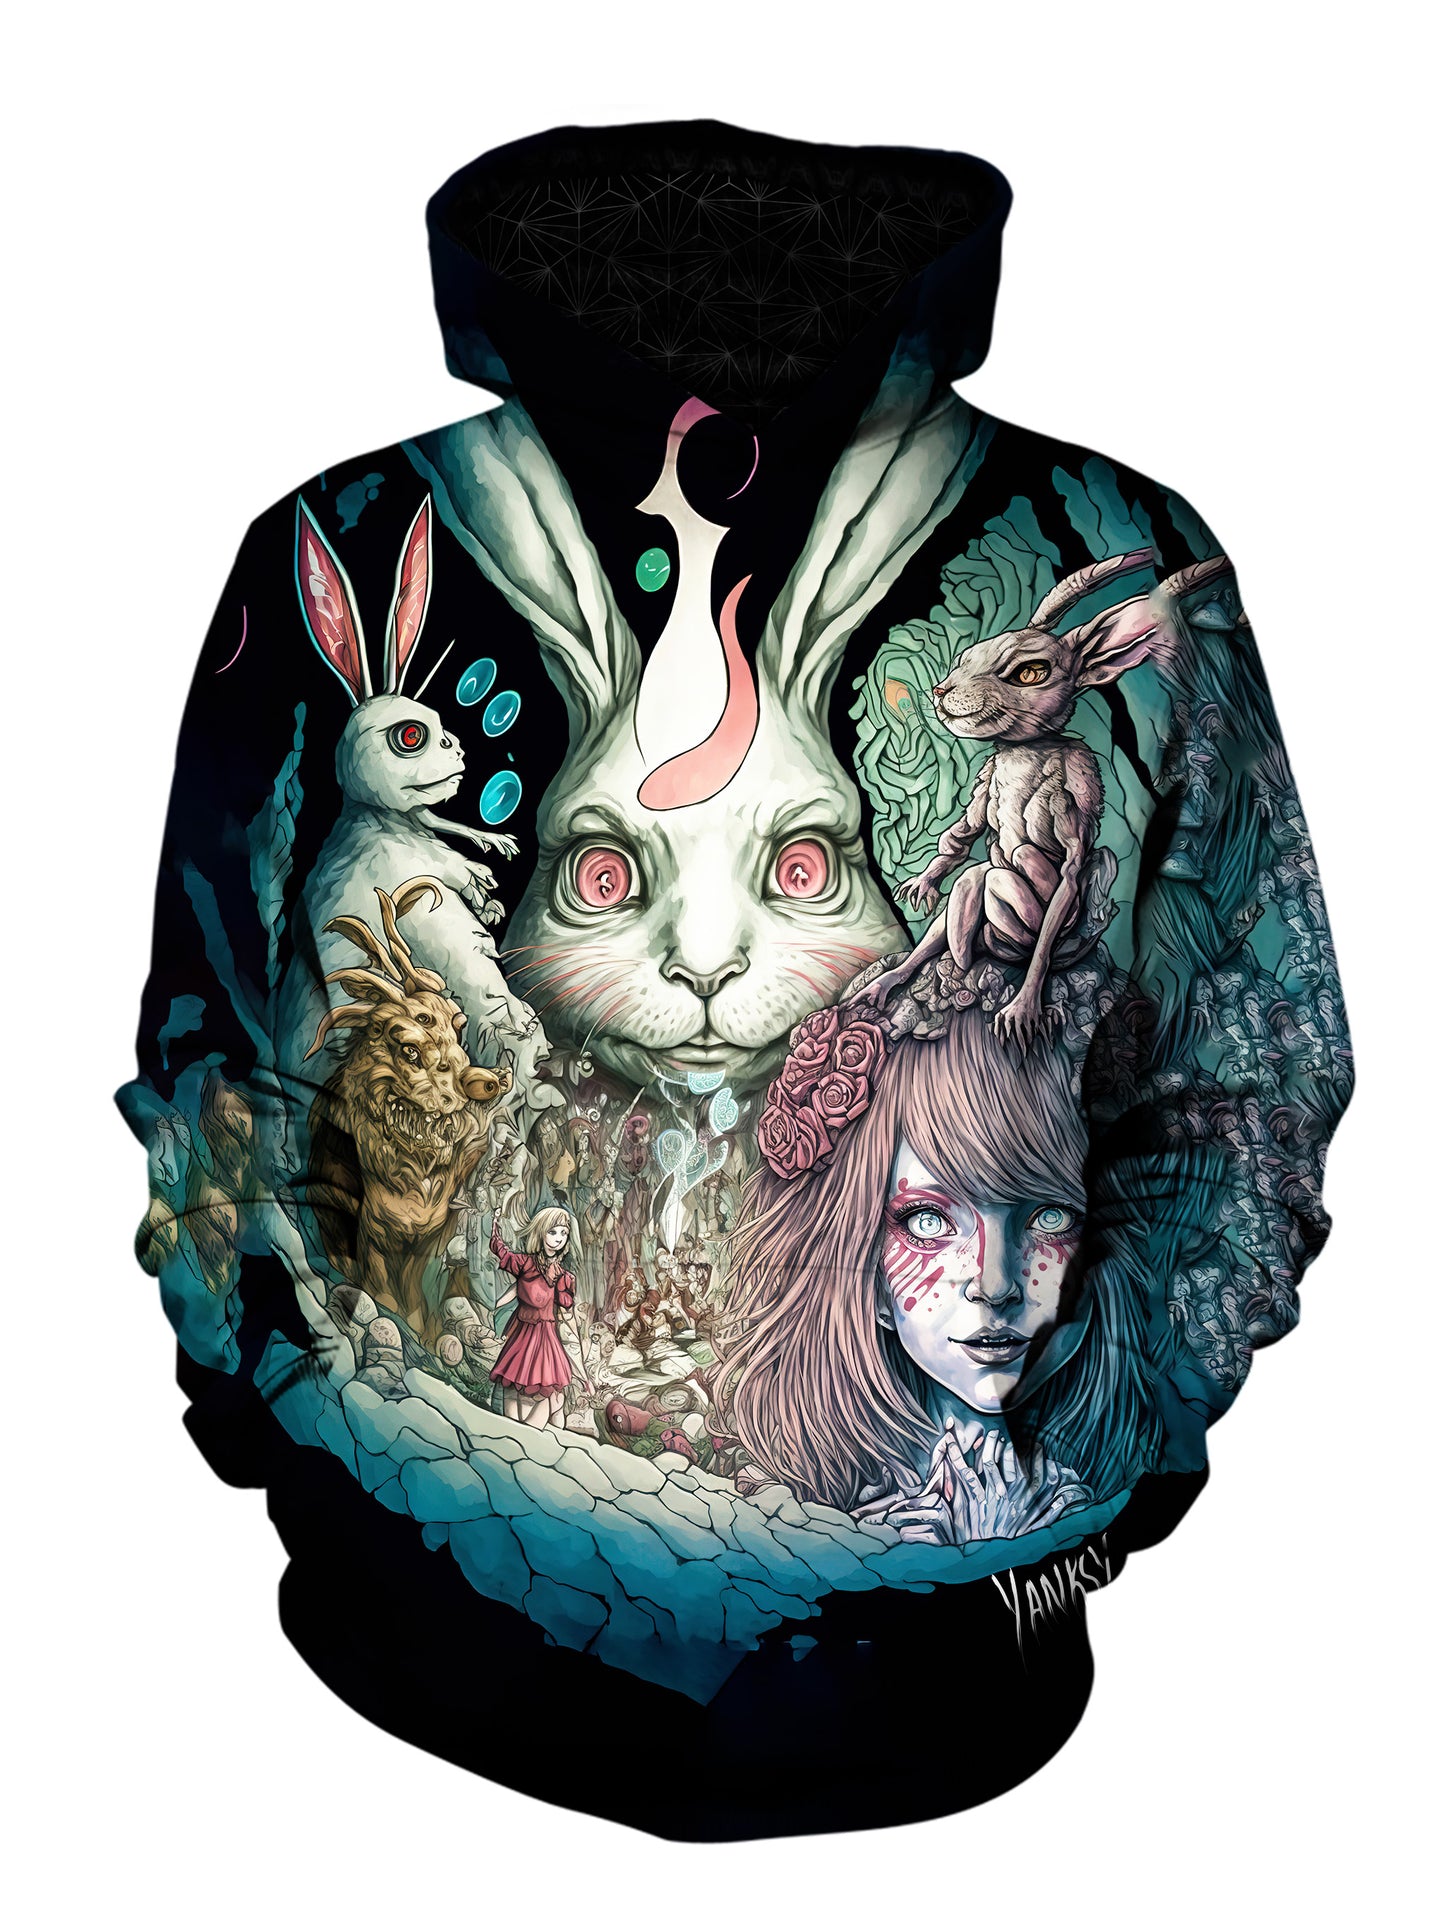 Embrace your inner artist with this one-of-a-kind trippy hoodie